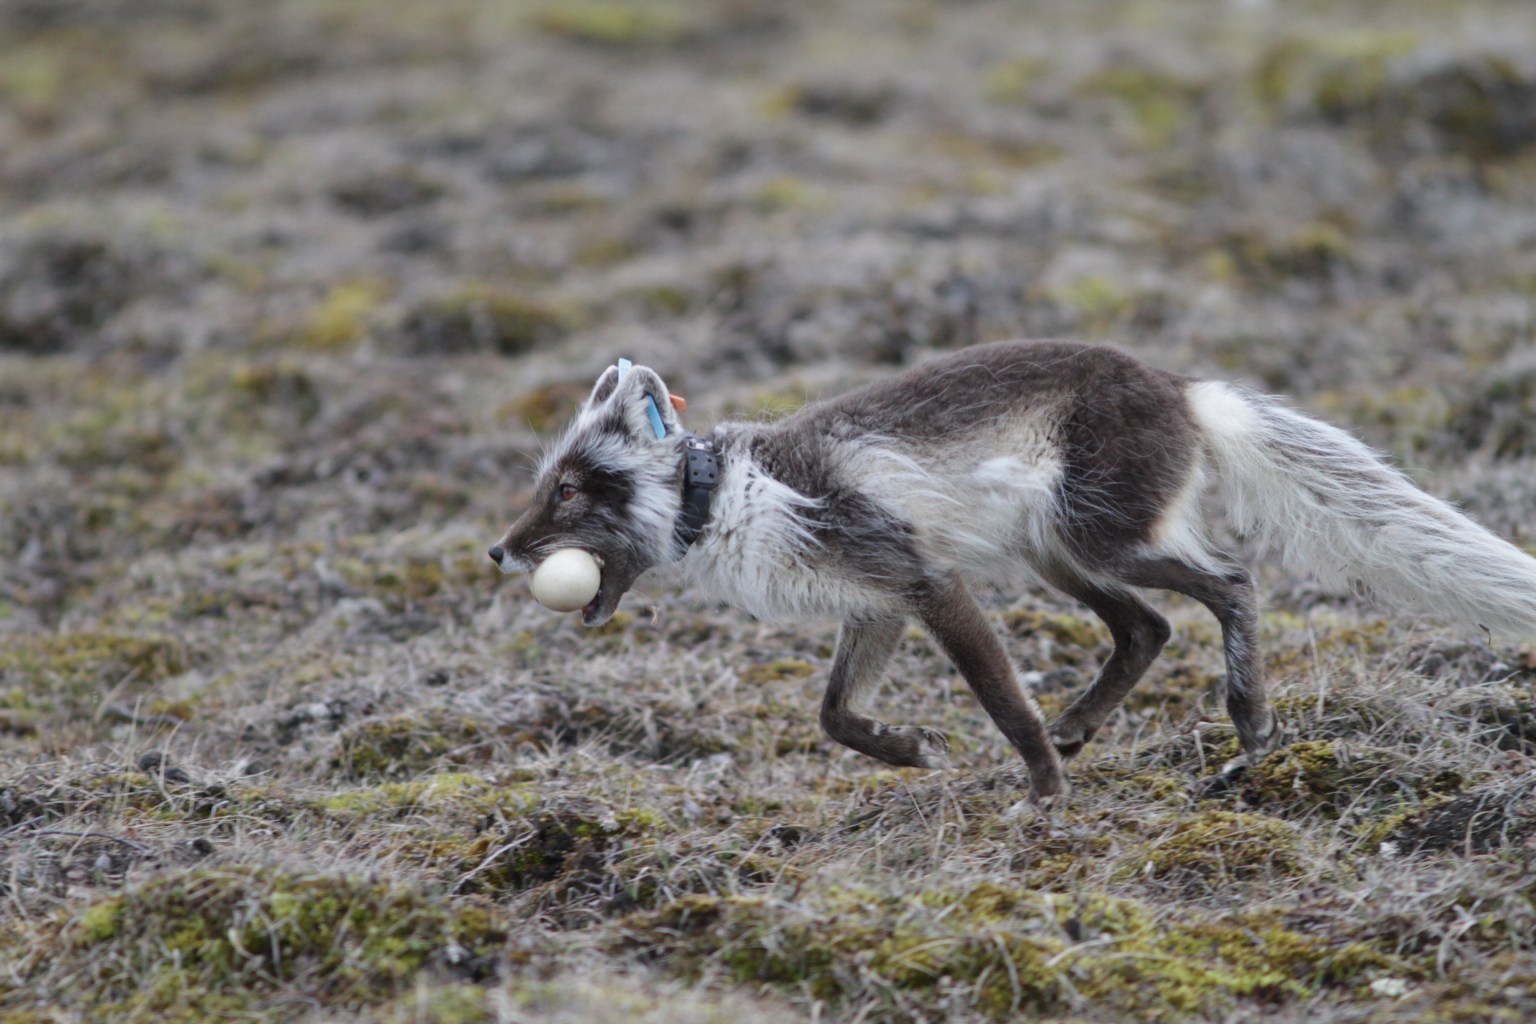 A photo of a small Arctic fox running with a white ball in its mouth. The fox is shades of warm gray, with dark gray across its face, back, and legs, and light silver on its belly and tail. It is wearing a black tracking collar and has colorful tags on its ears. The fox runs across gray-brown dry grass.